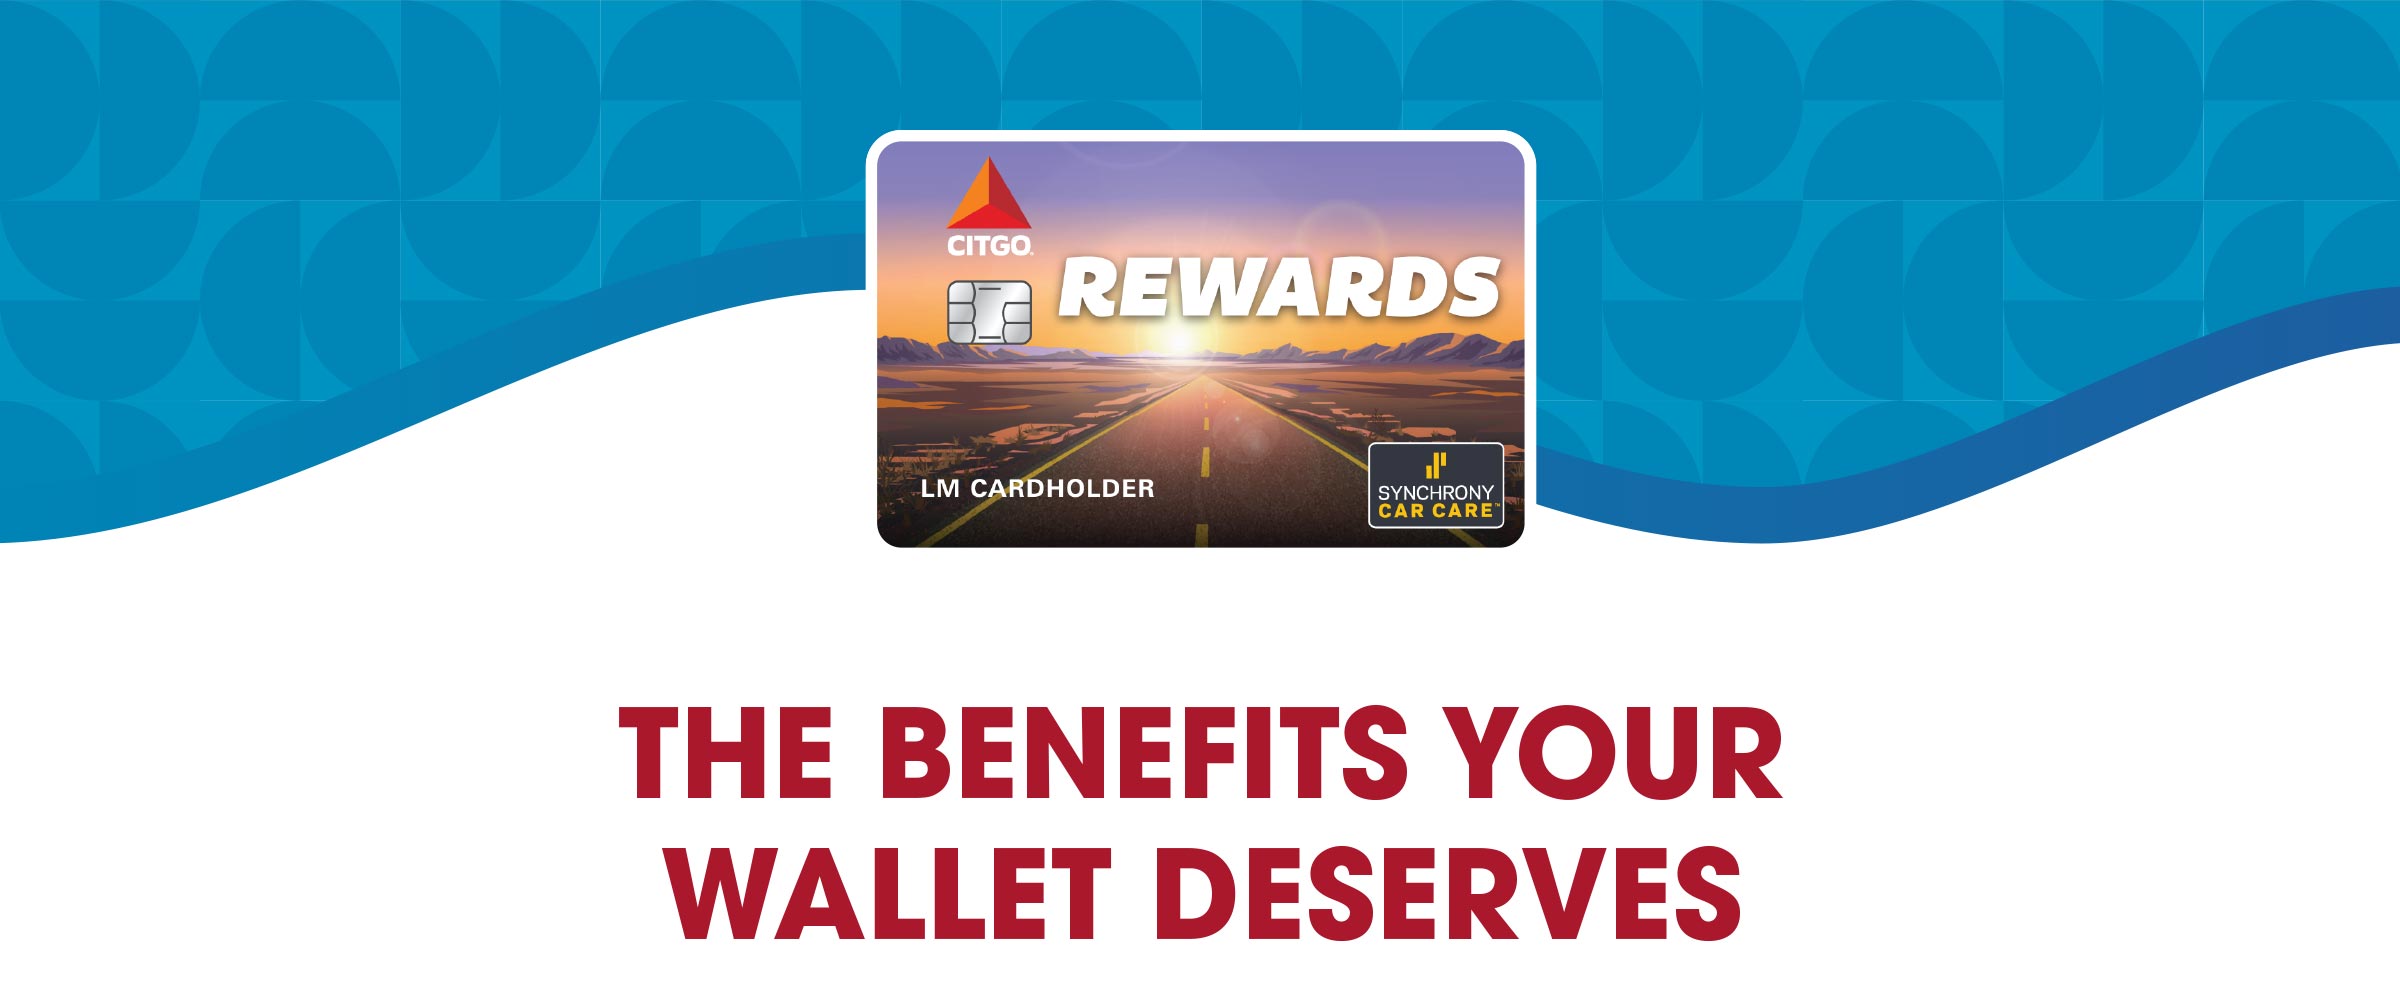 THE BENEFITS YOUR WALLET DESERVES